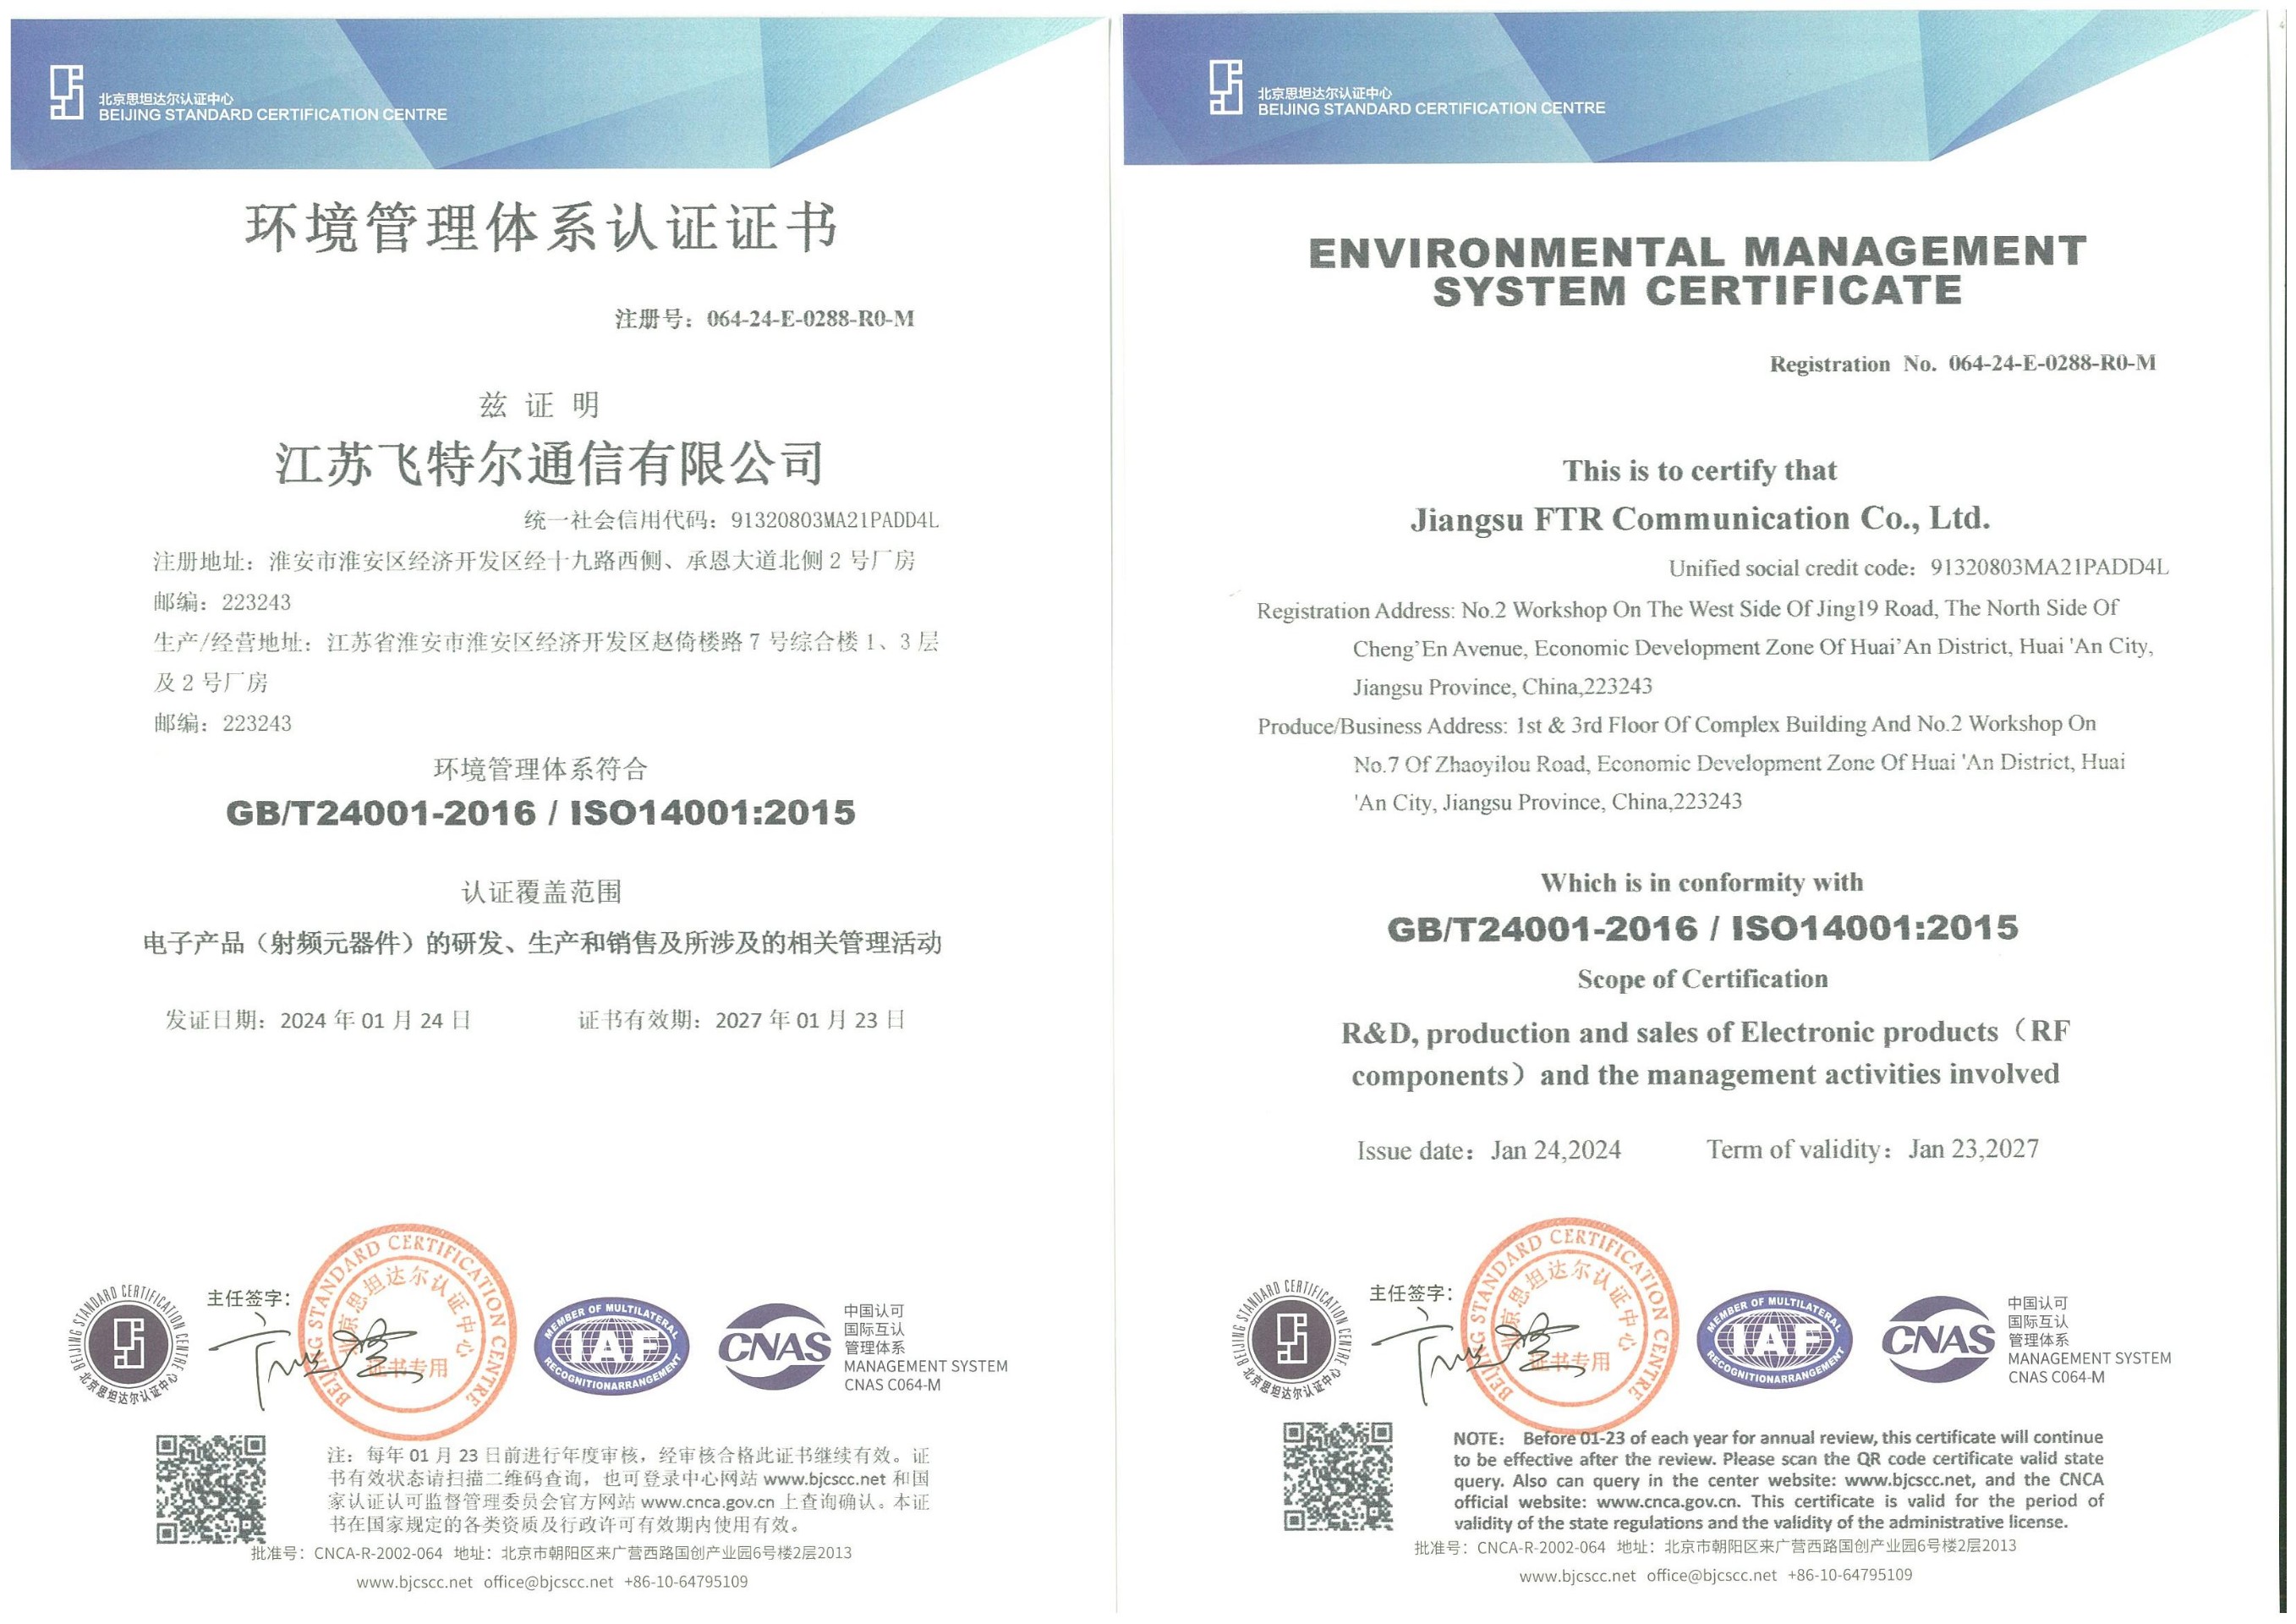 Our company has obtained the ISO14001 Environmental Management System Certification